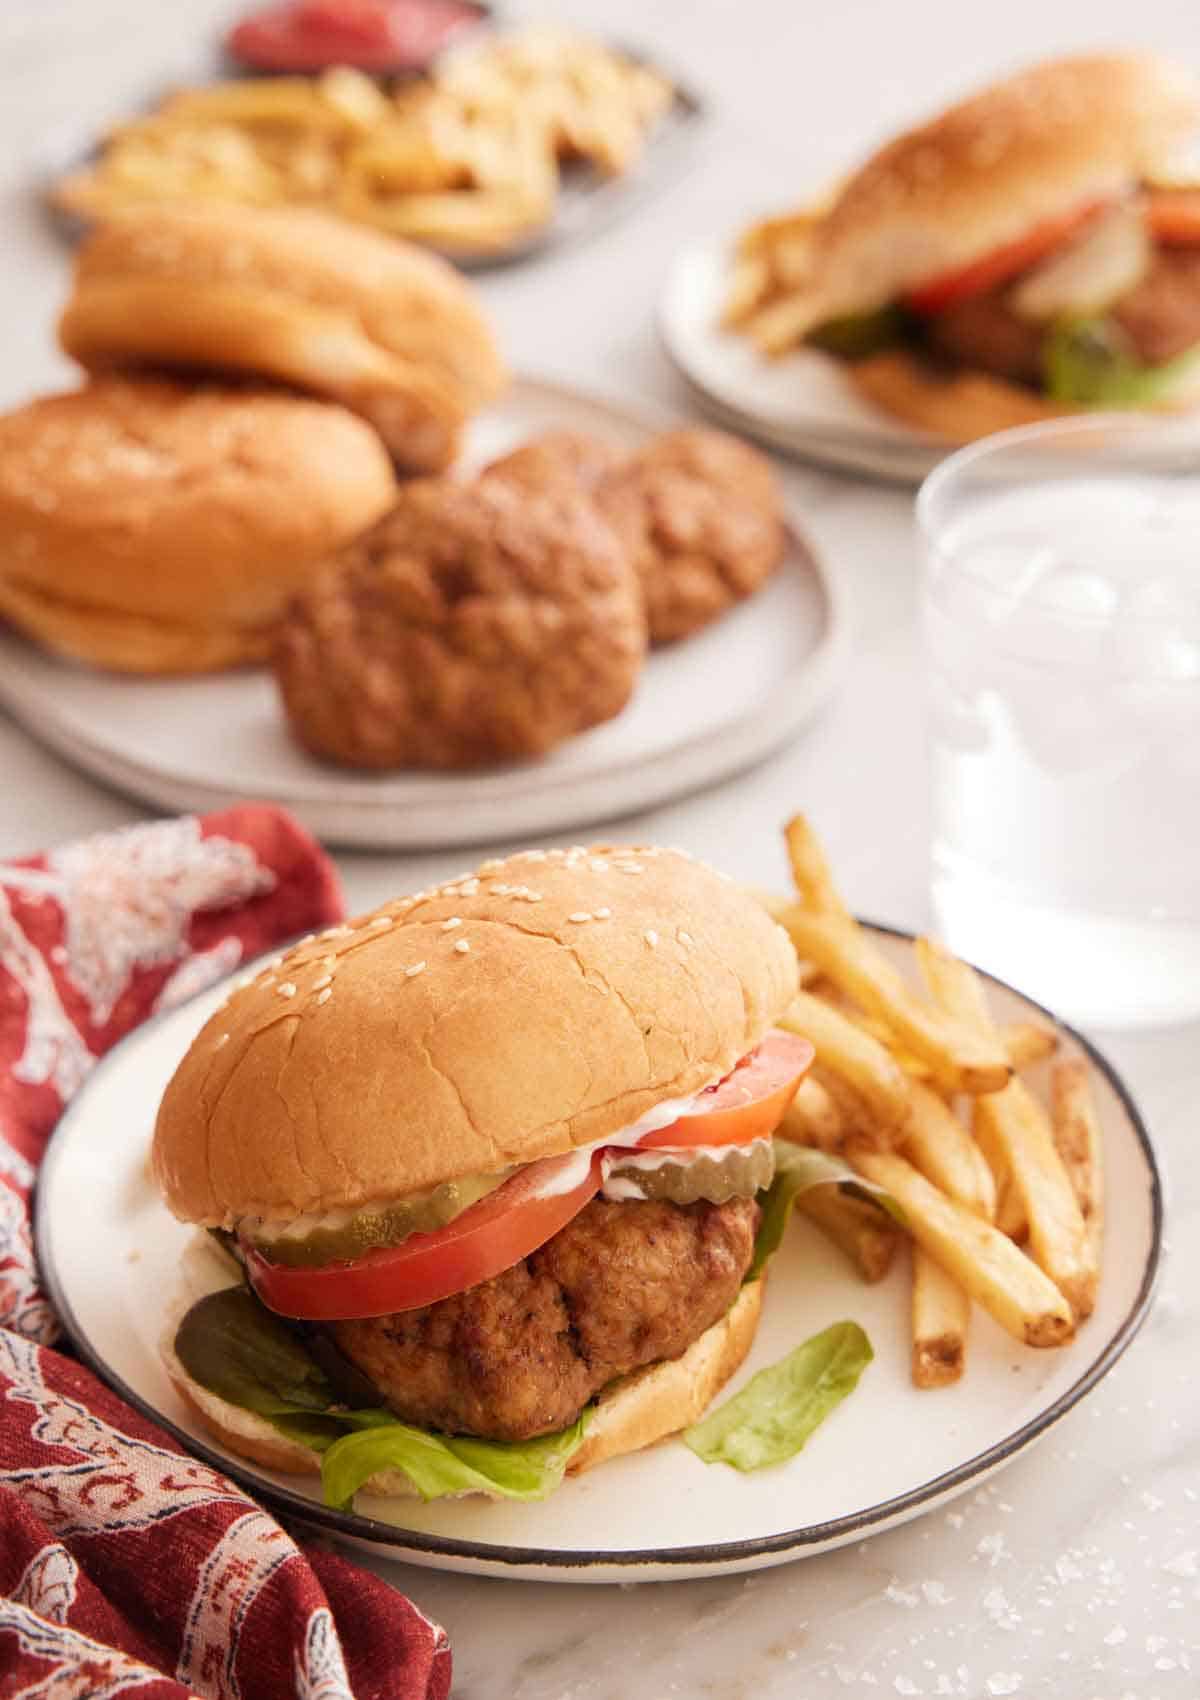 A plate of air fryer turkey burger with fries on the side with a glass of water in the background along with more burger ingredients.